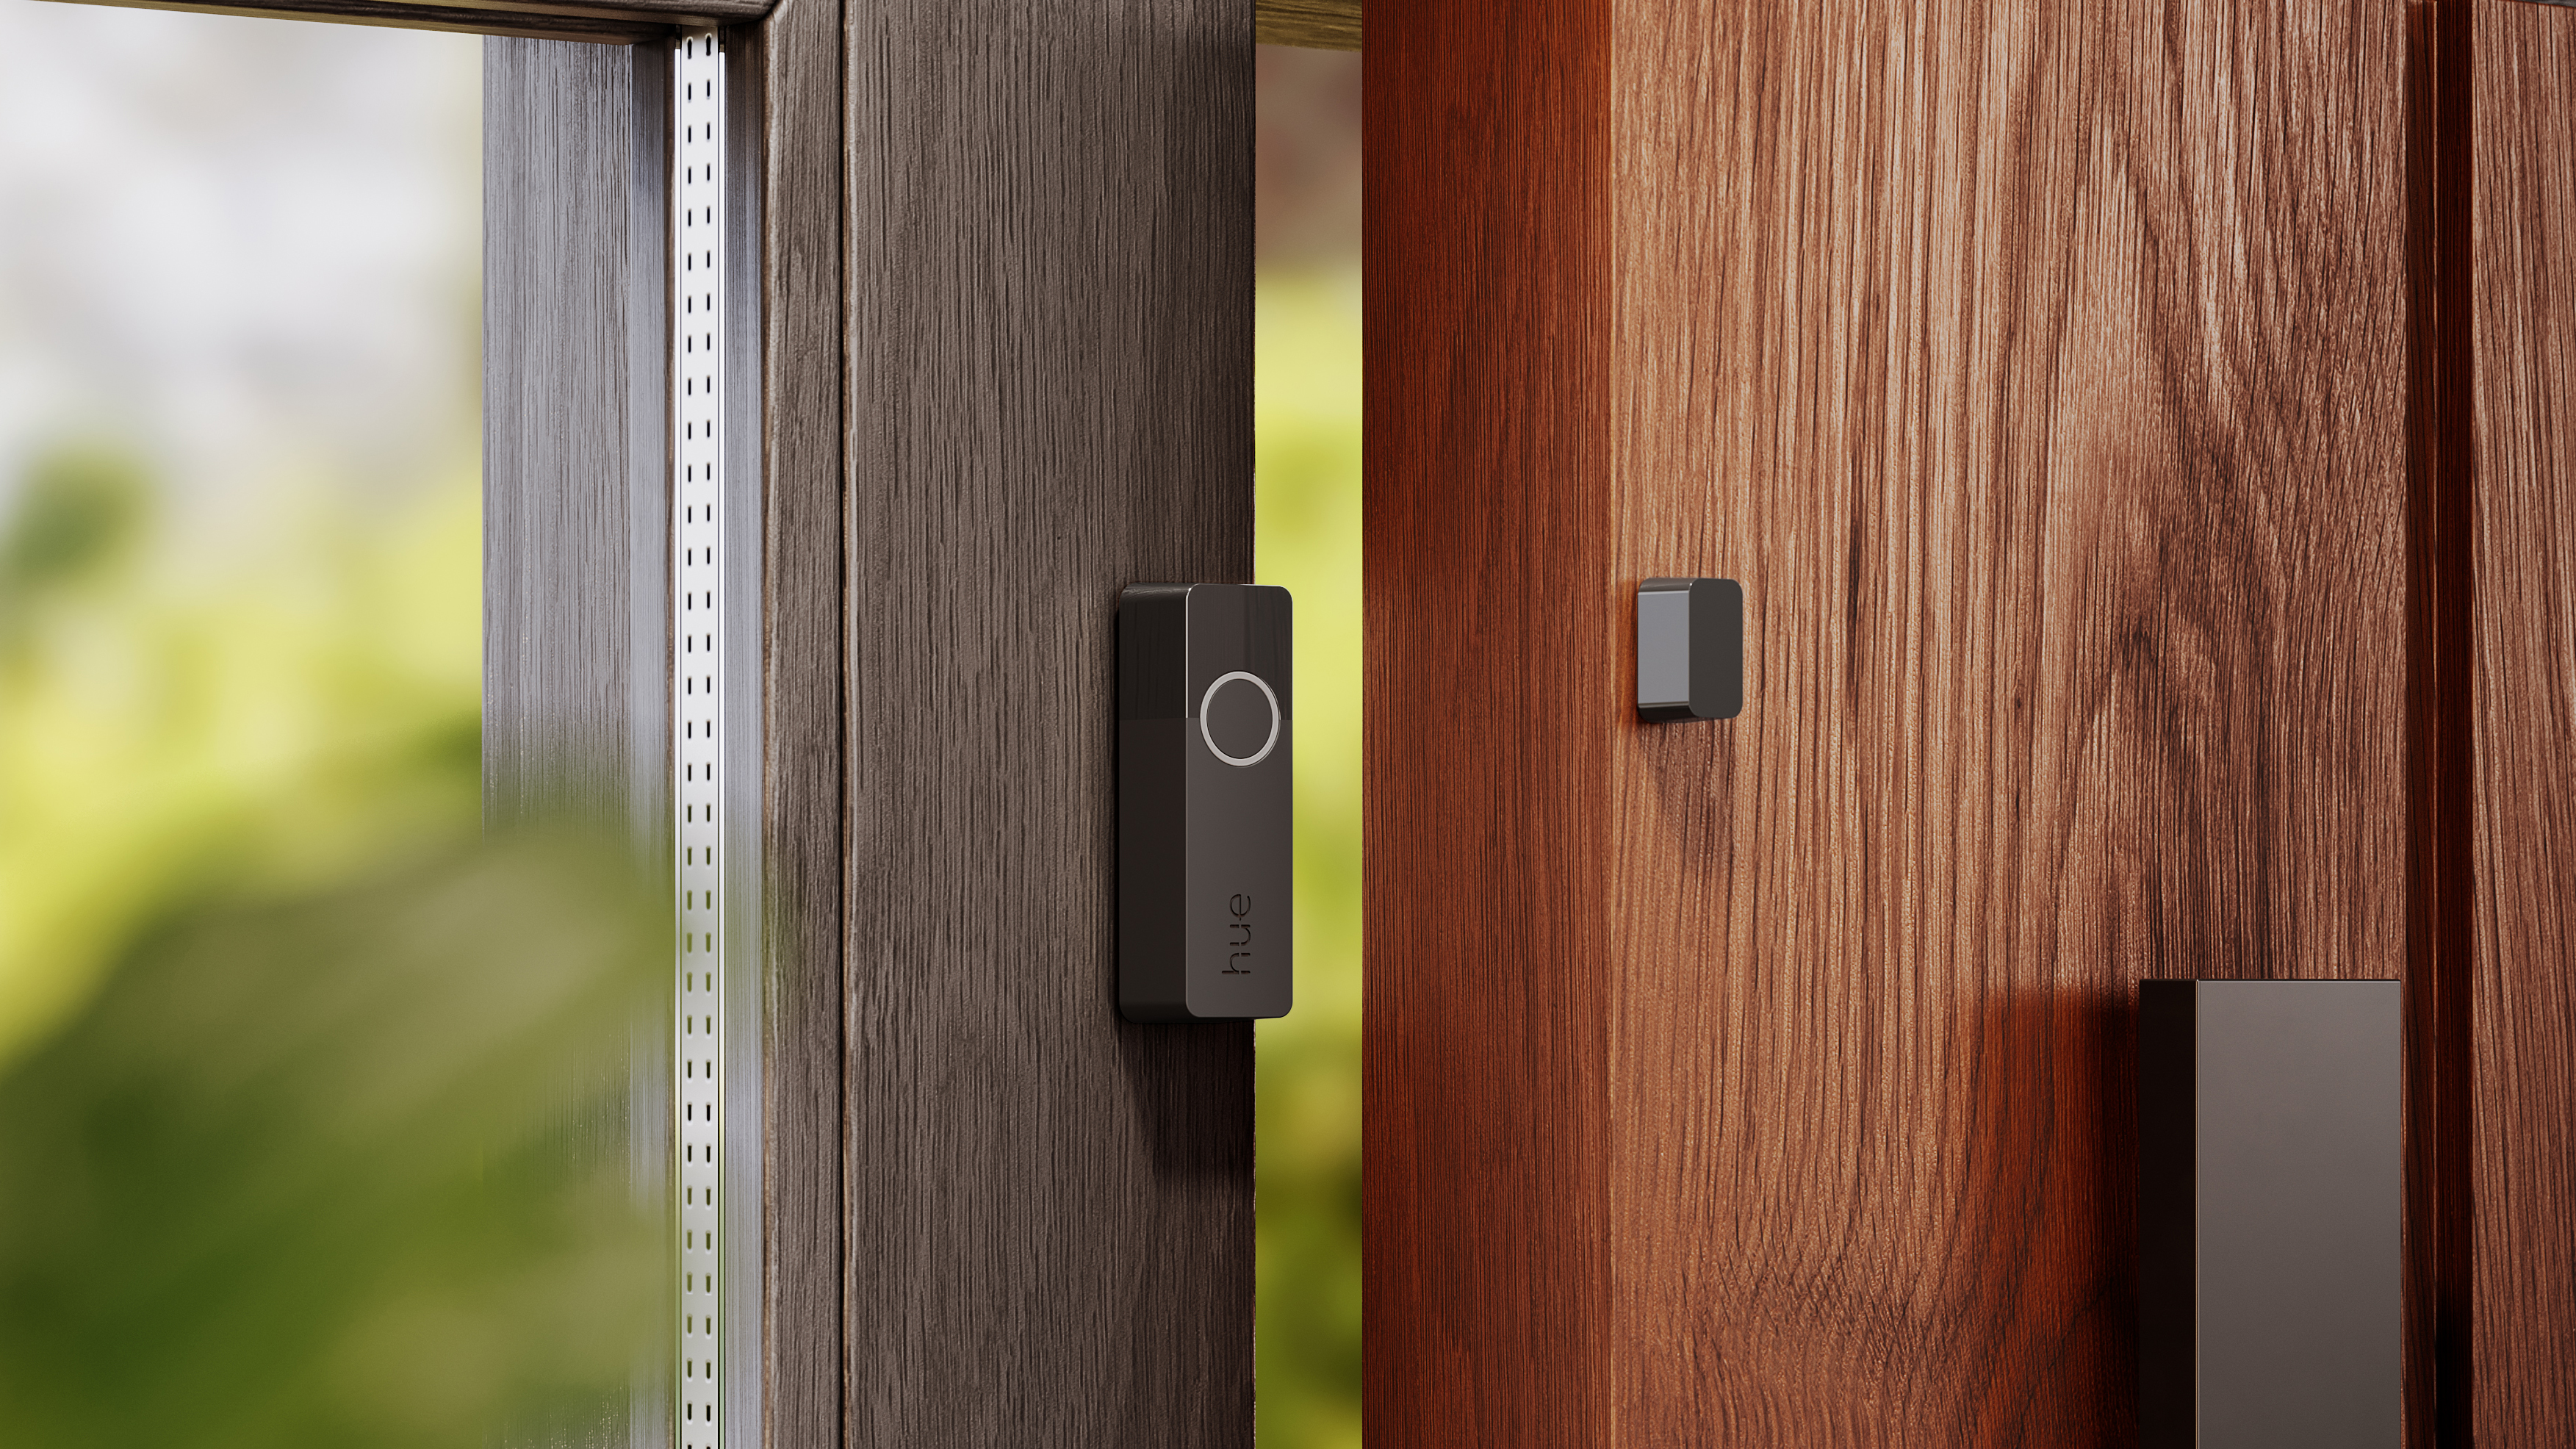 A Philips Hue Secure contact sensor on the inside of a doorway